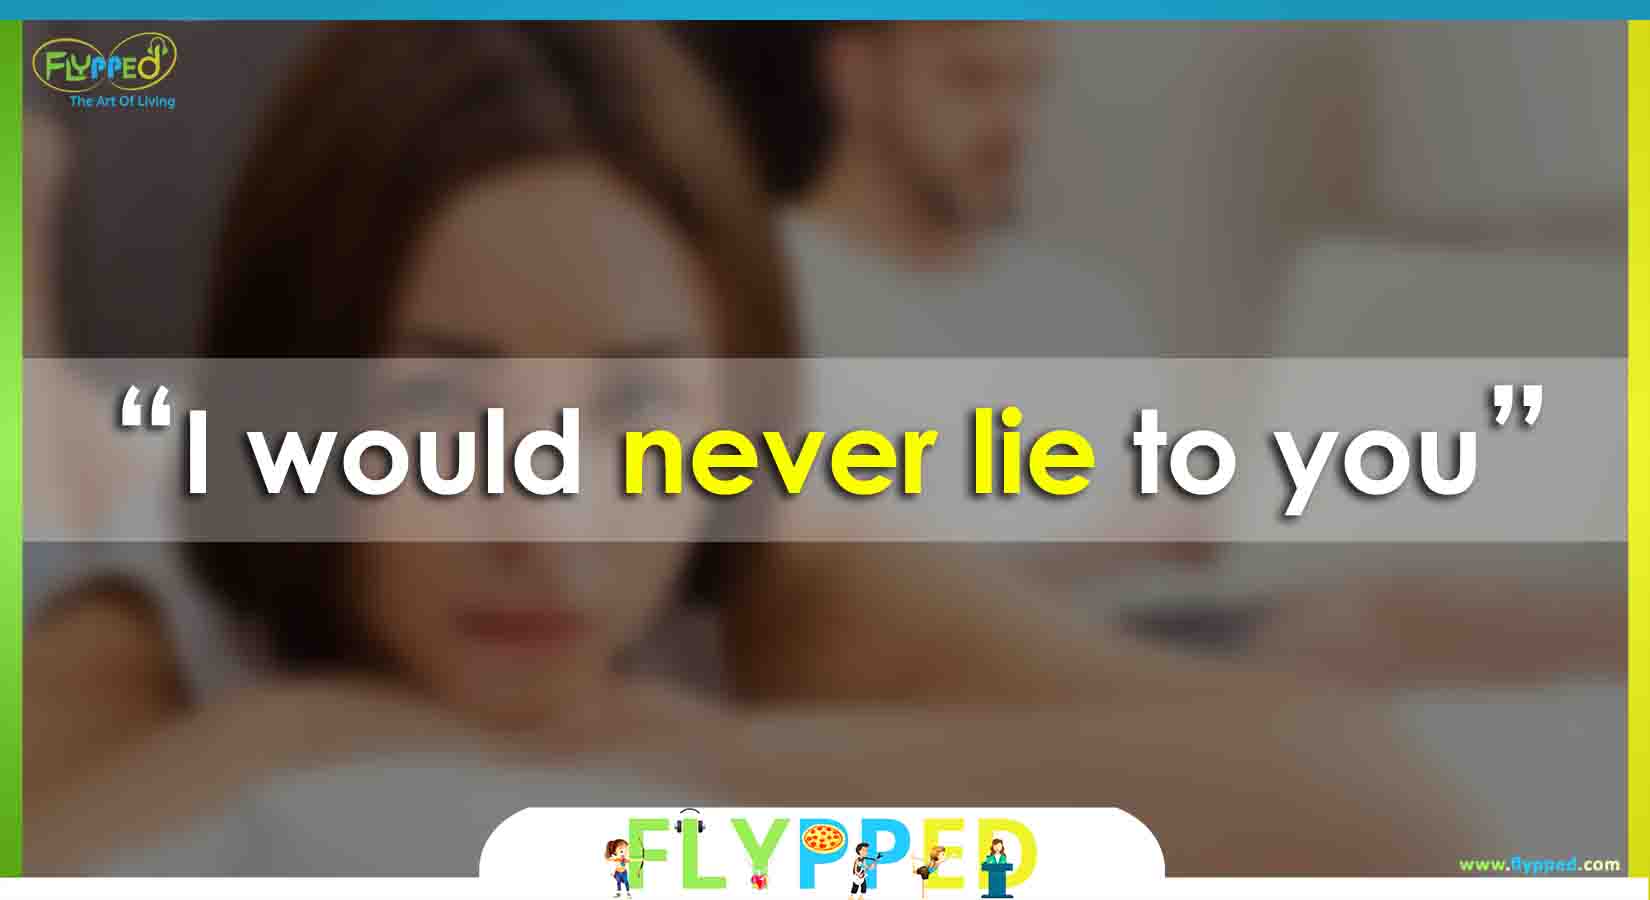 10-of-the-most-common-lies-men-tell-their-girlfriends